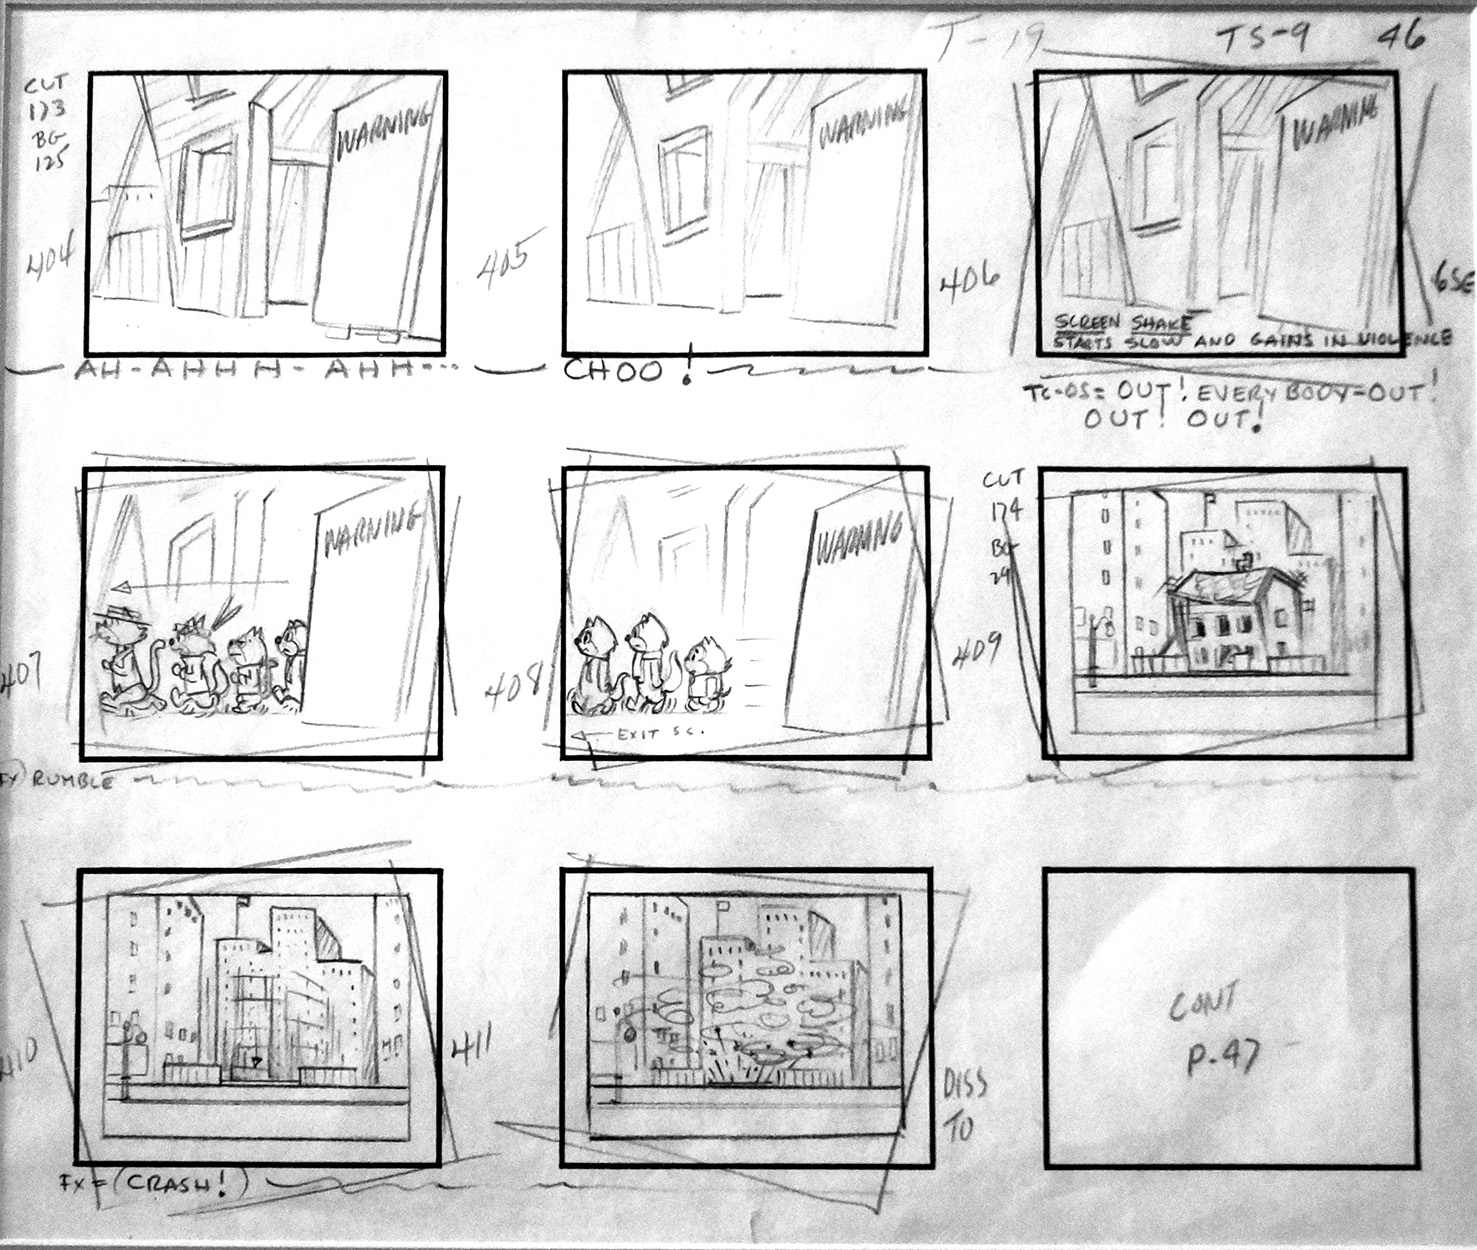 Top Cat Storyboard Sequence 1 (Original) art by Hanna-Barbera Studio at The Illustration Art Gallery